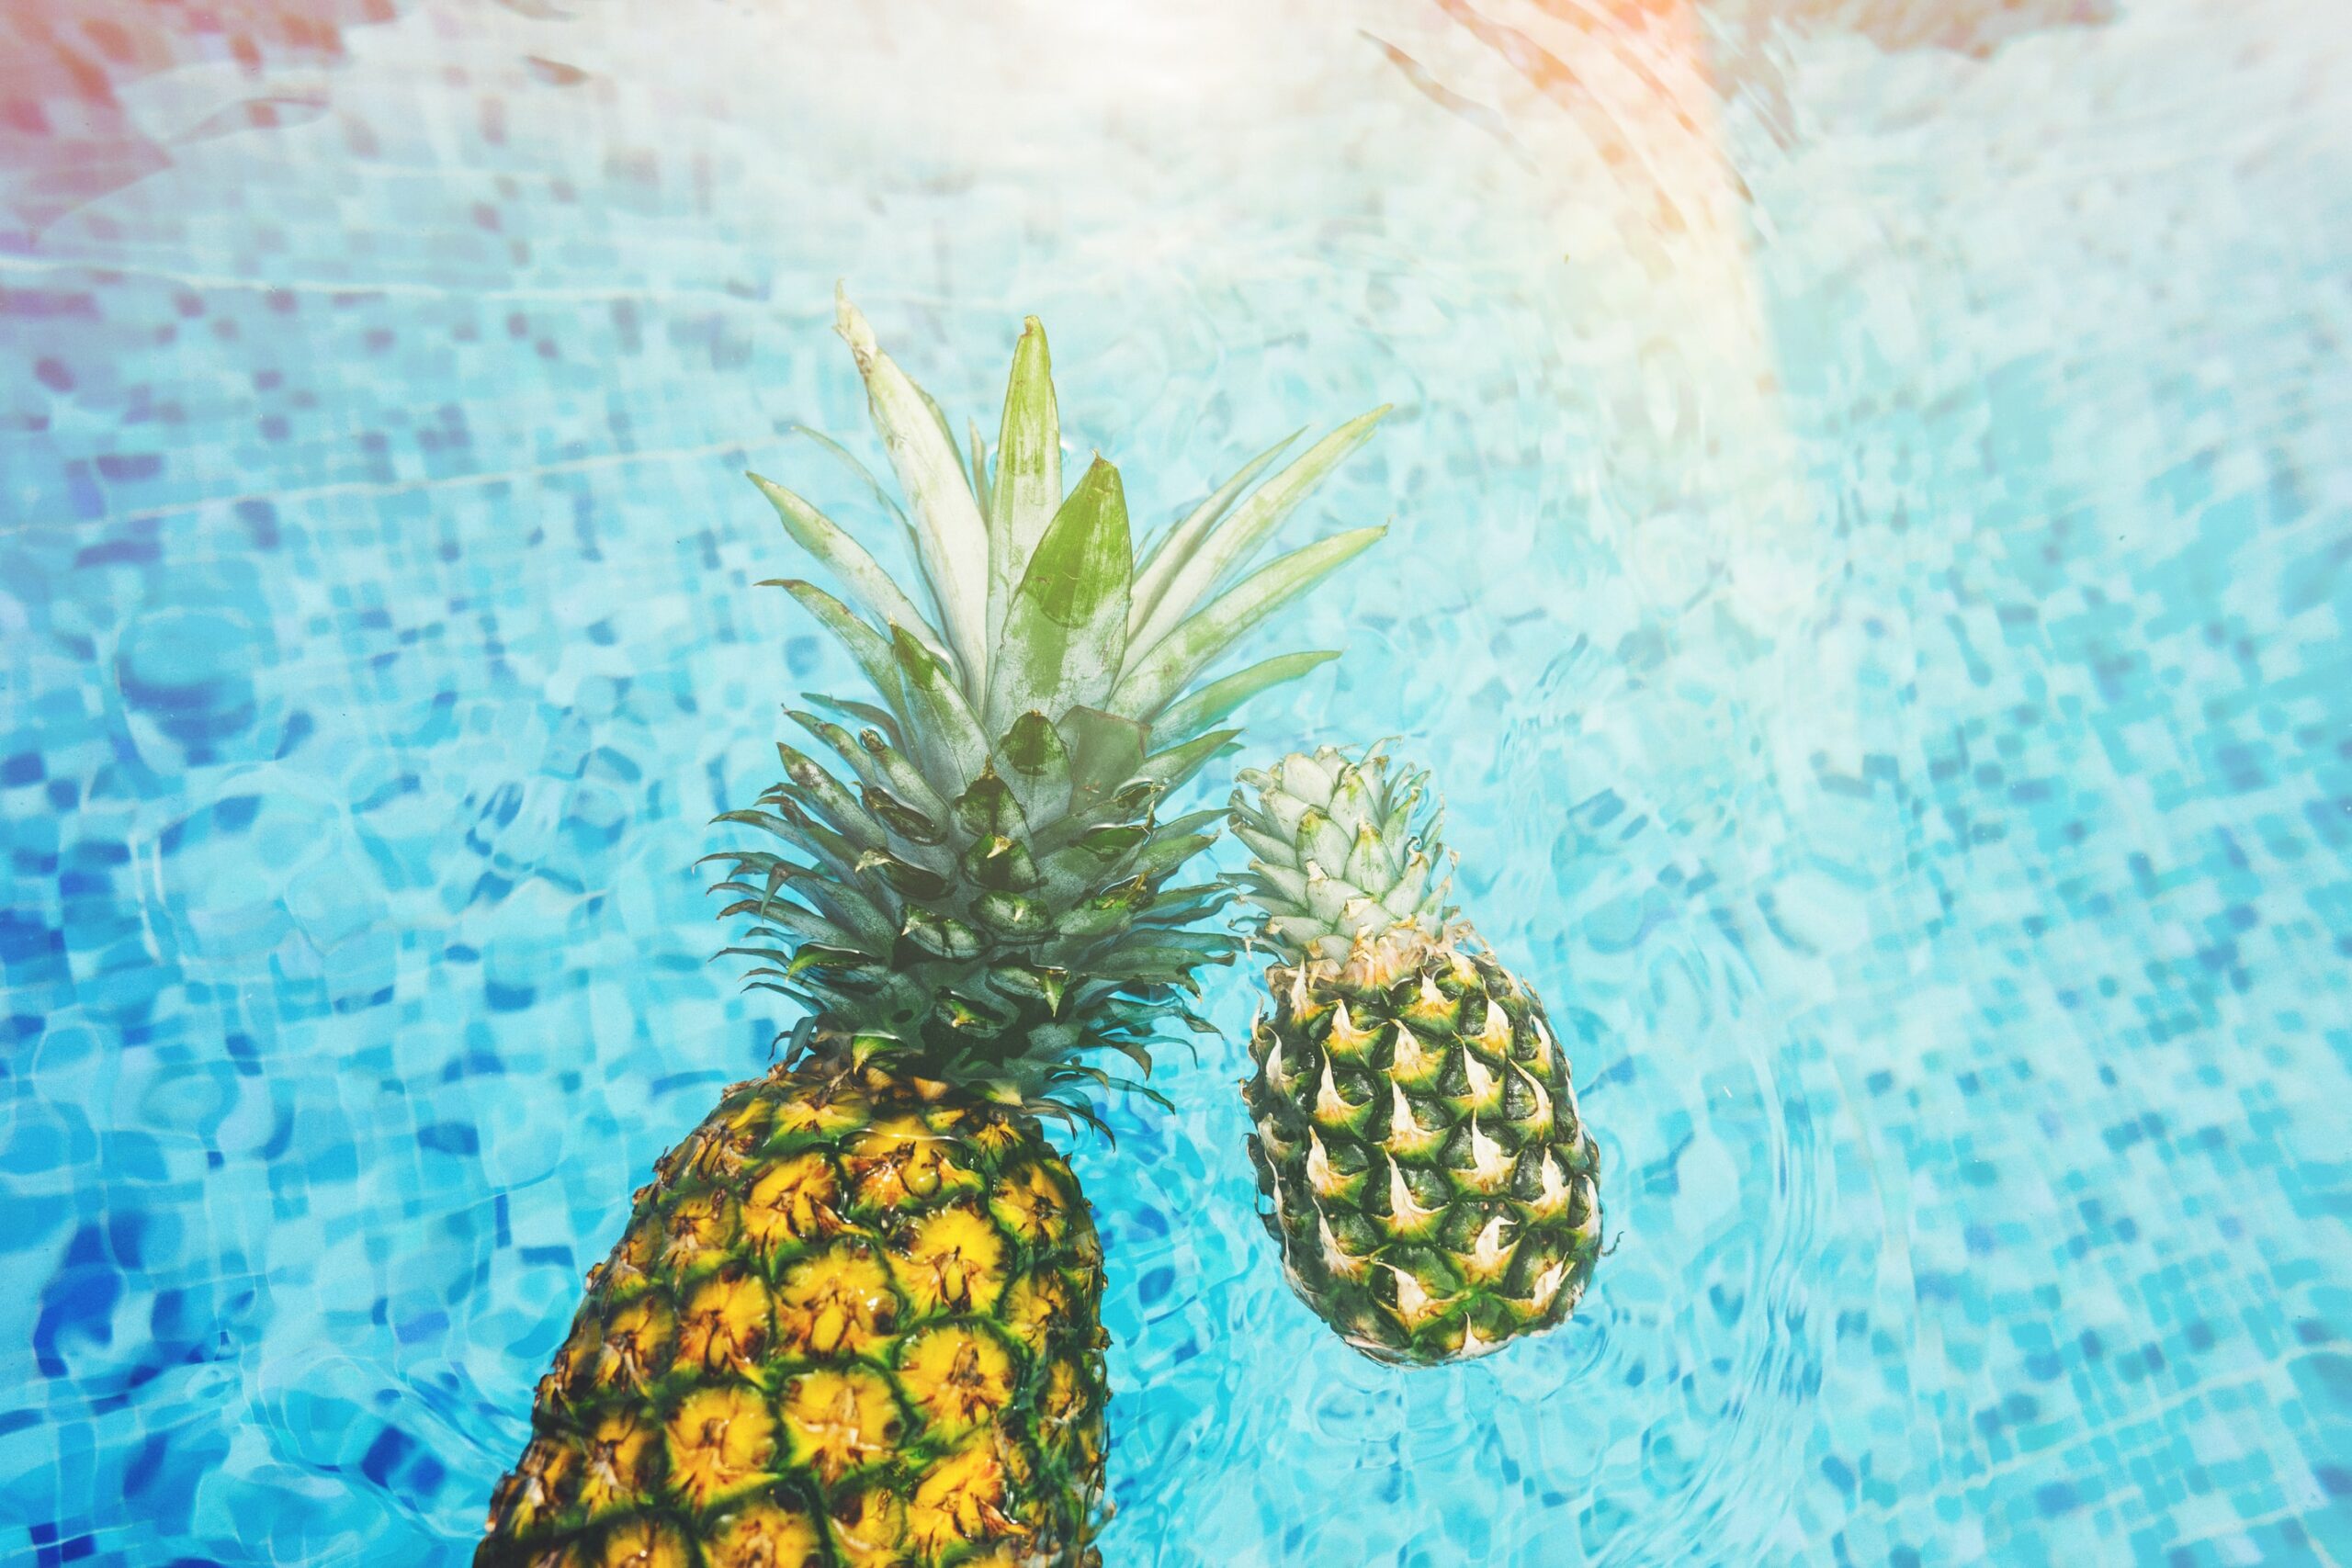 pineapple - know who likes pineapple when you sell pina colada - 323 media marketing insights blog article by Chris bickford